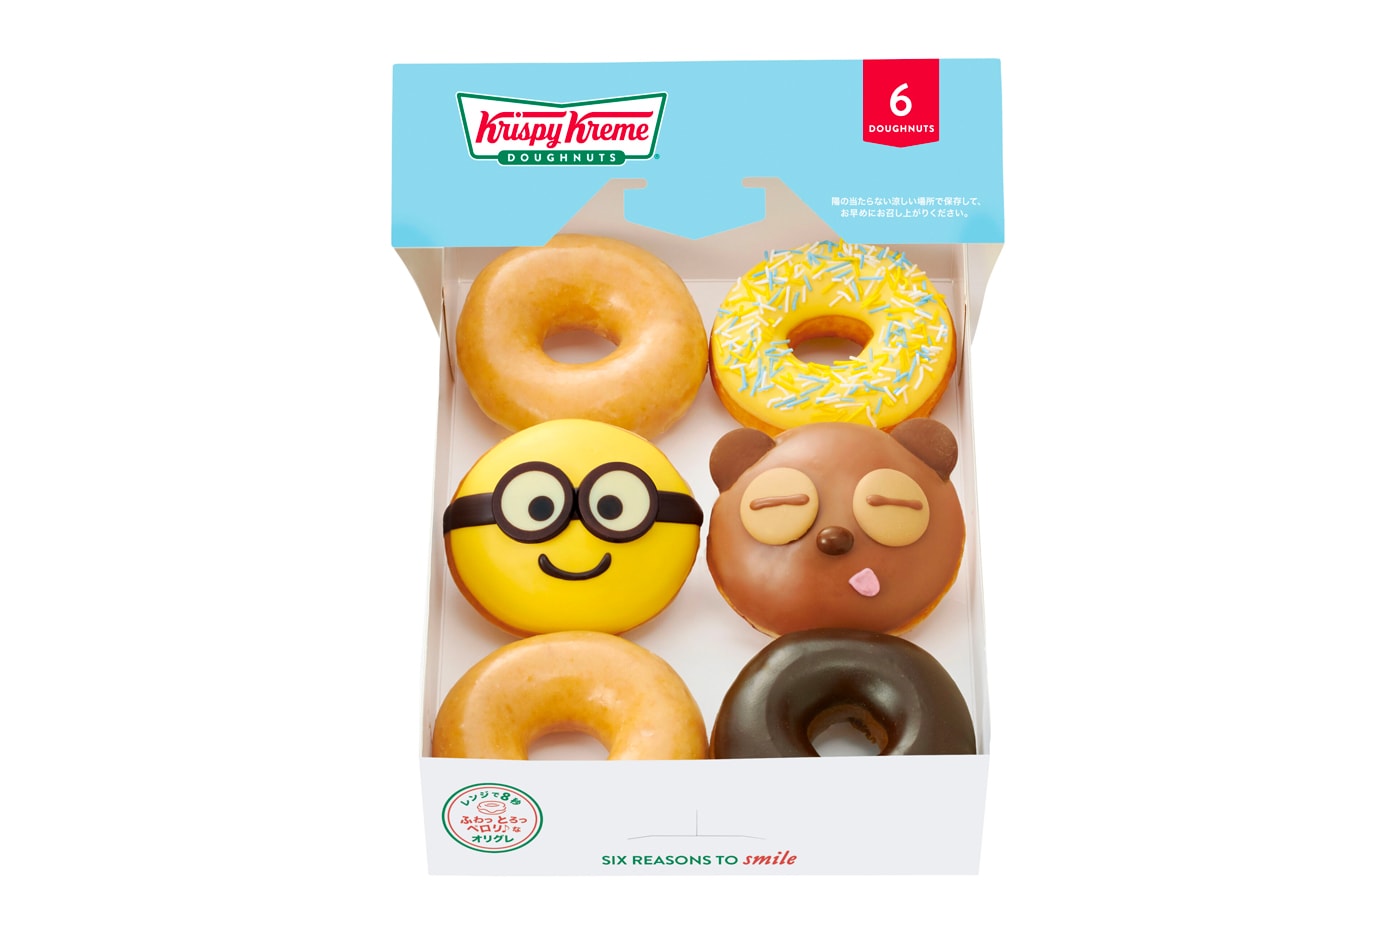 Krispy Kreme Japan Celebrates the Minions' Love for Bananas in New Donuts Series snacks sweets banana sweets desserts chocolate smoothie 